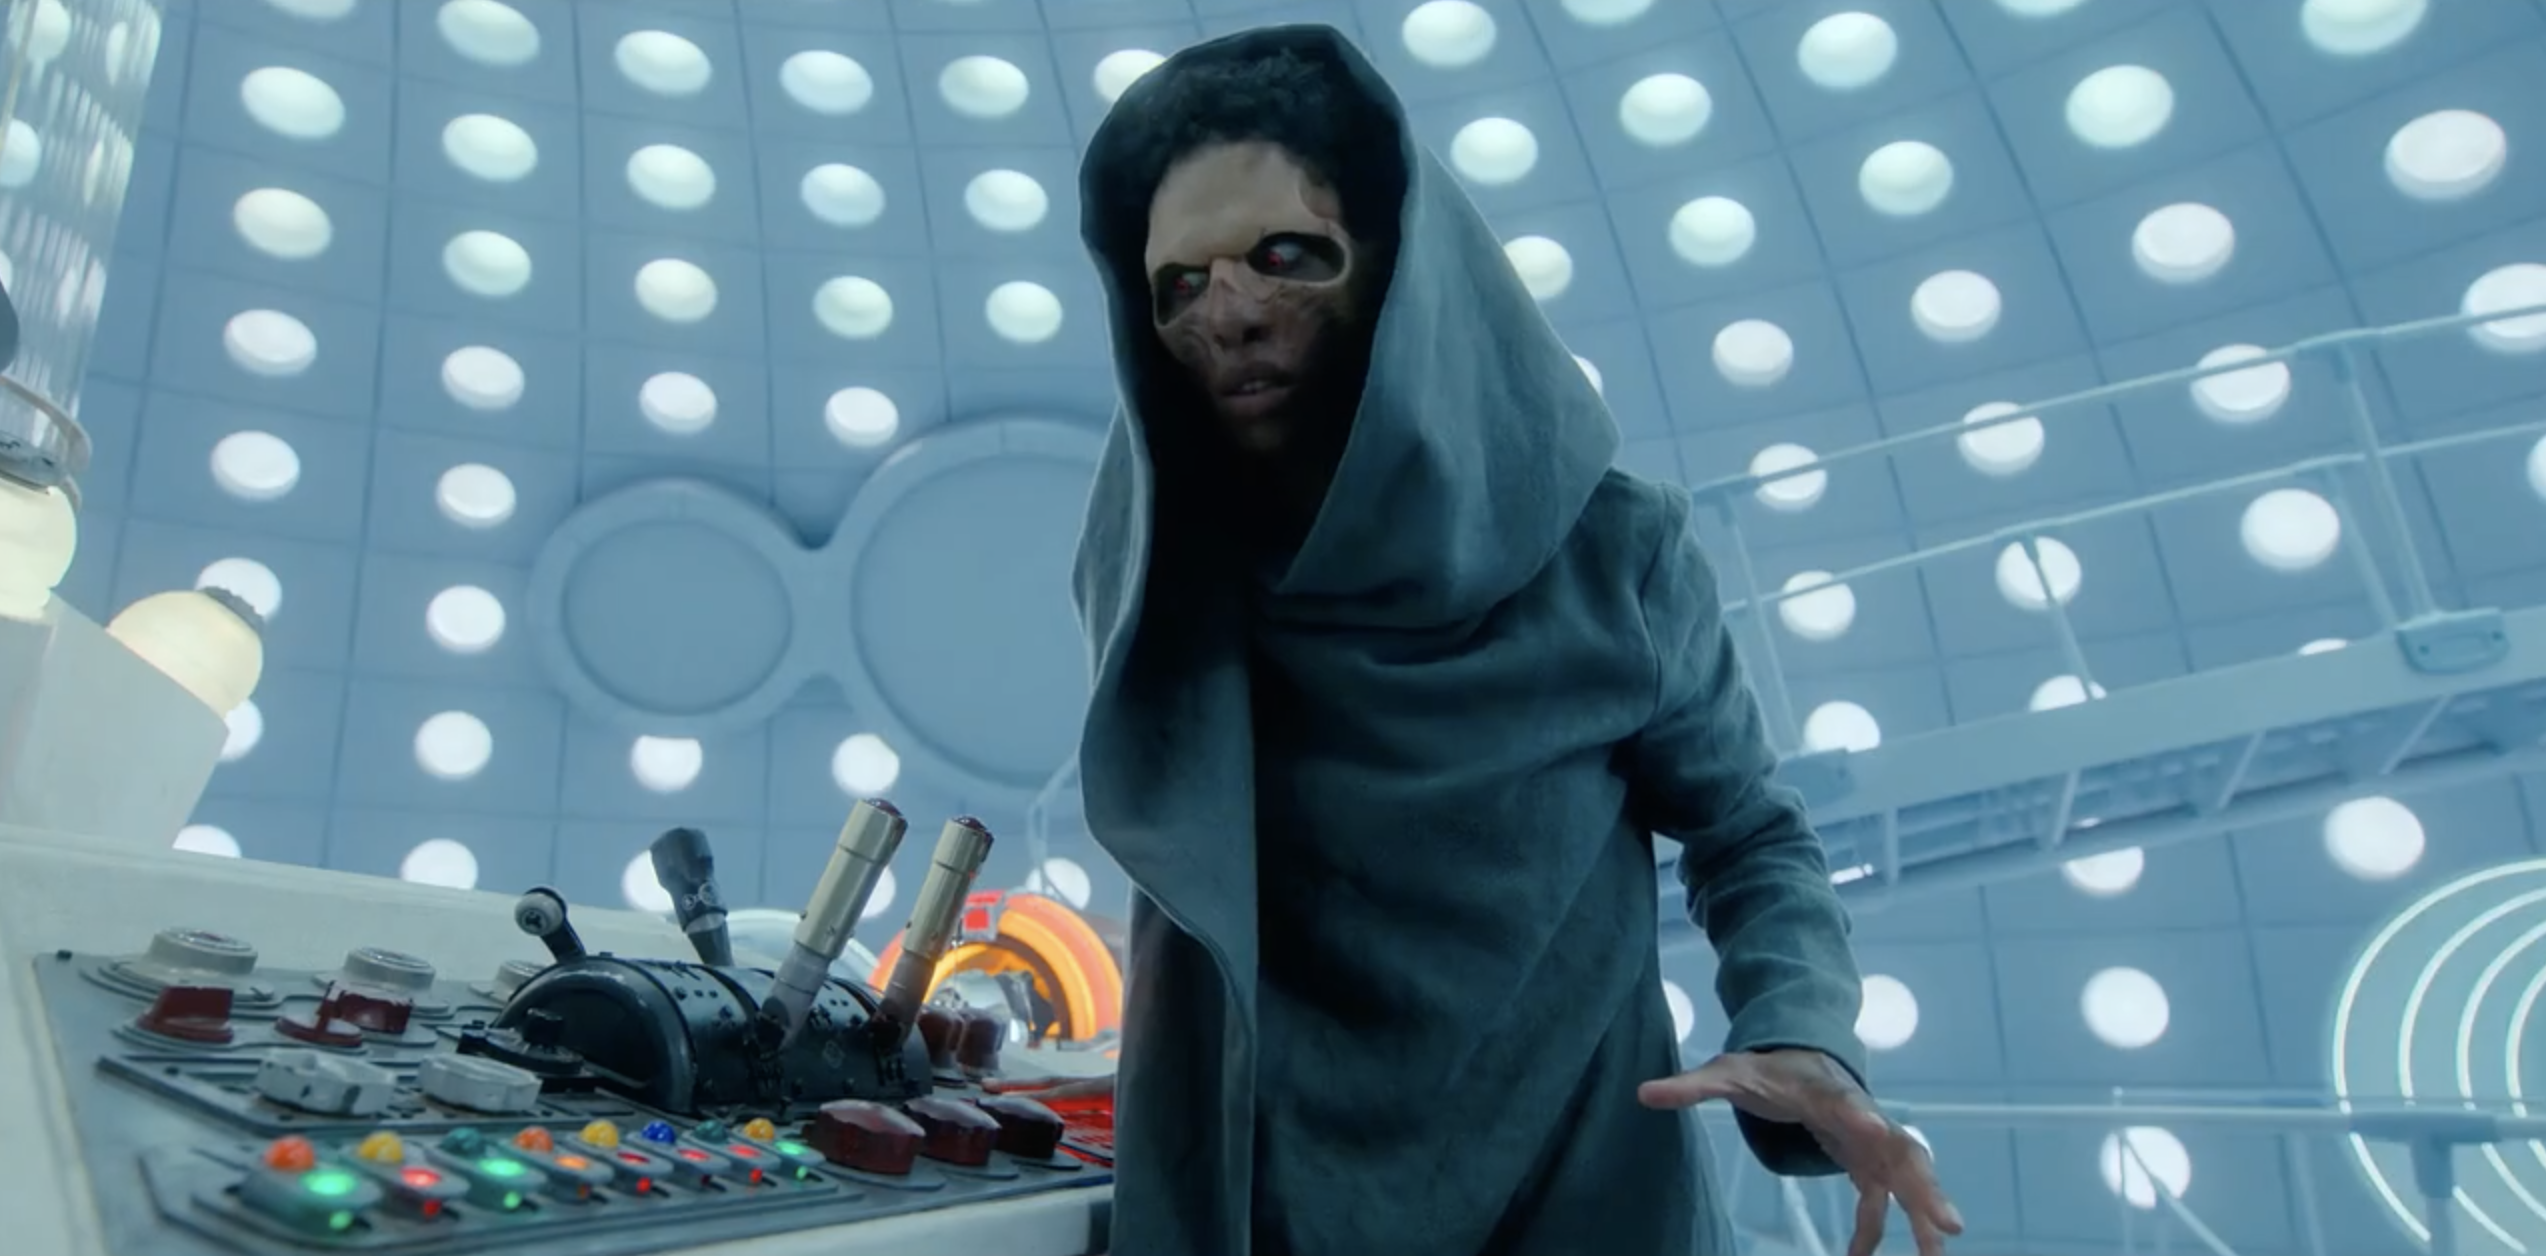 Harriet Arbinger in the TARDIS. (TV: Empire of Death [+]Loading...["Empire of Death (TV story)"])